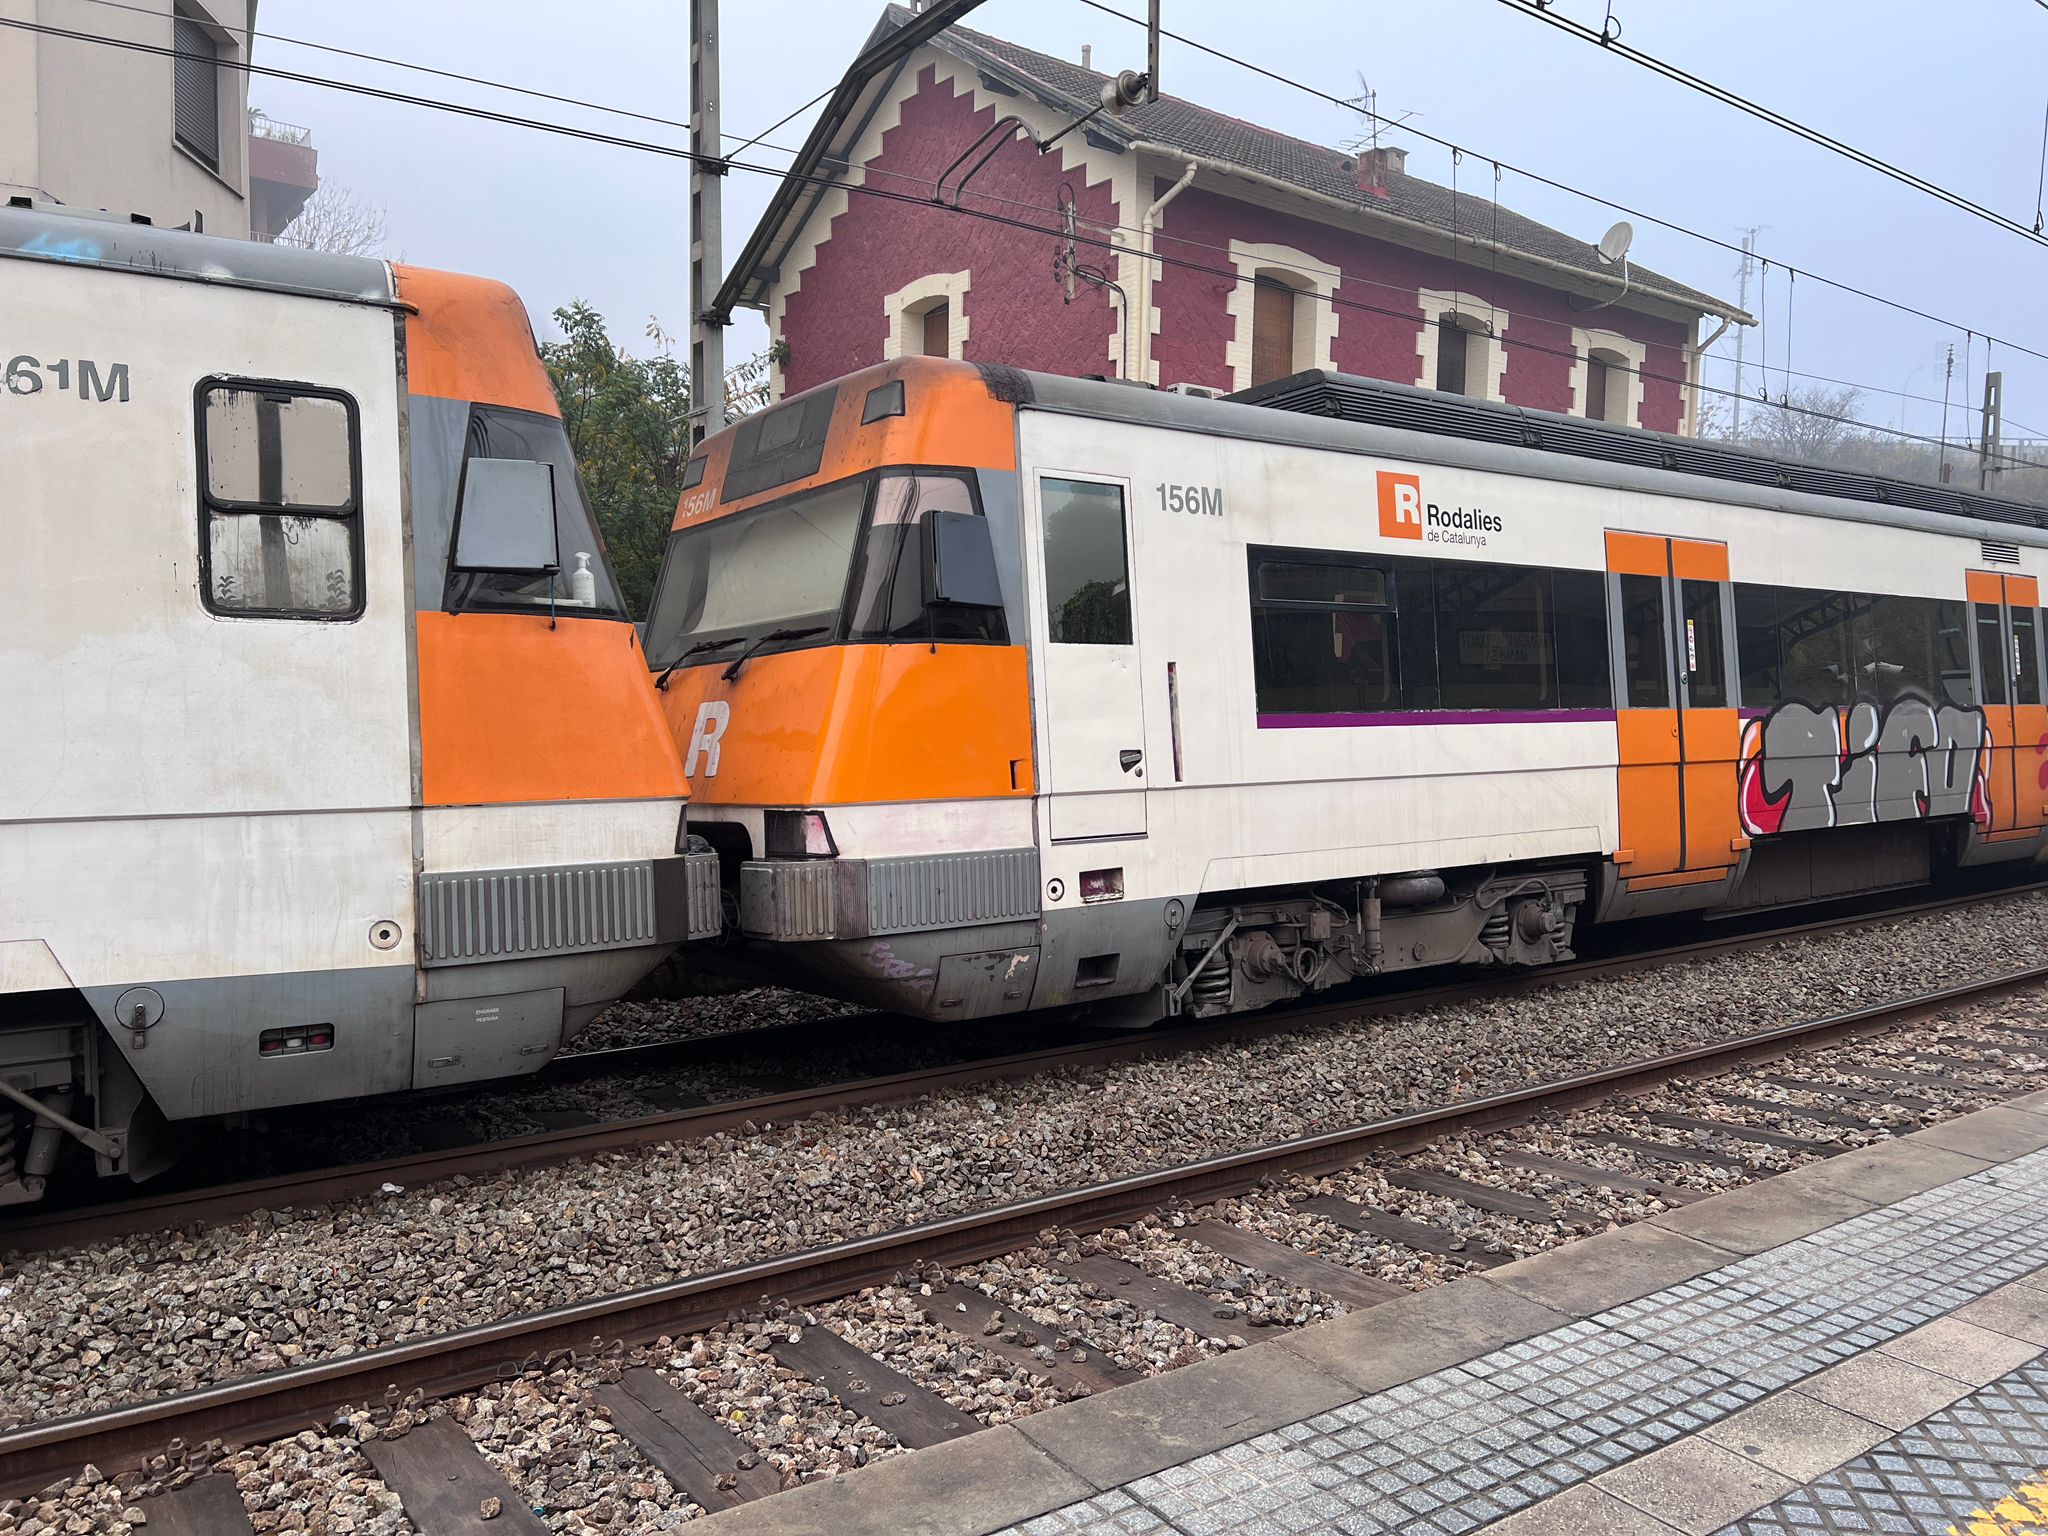 More than 150 injuries after collision between two Barcelona suburban trains